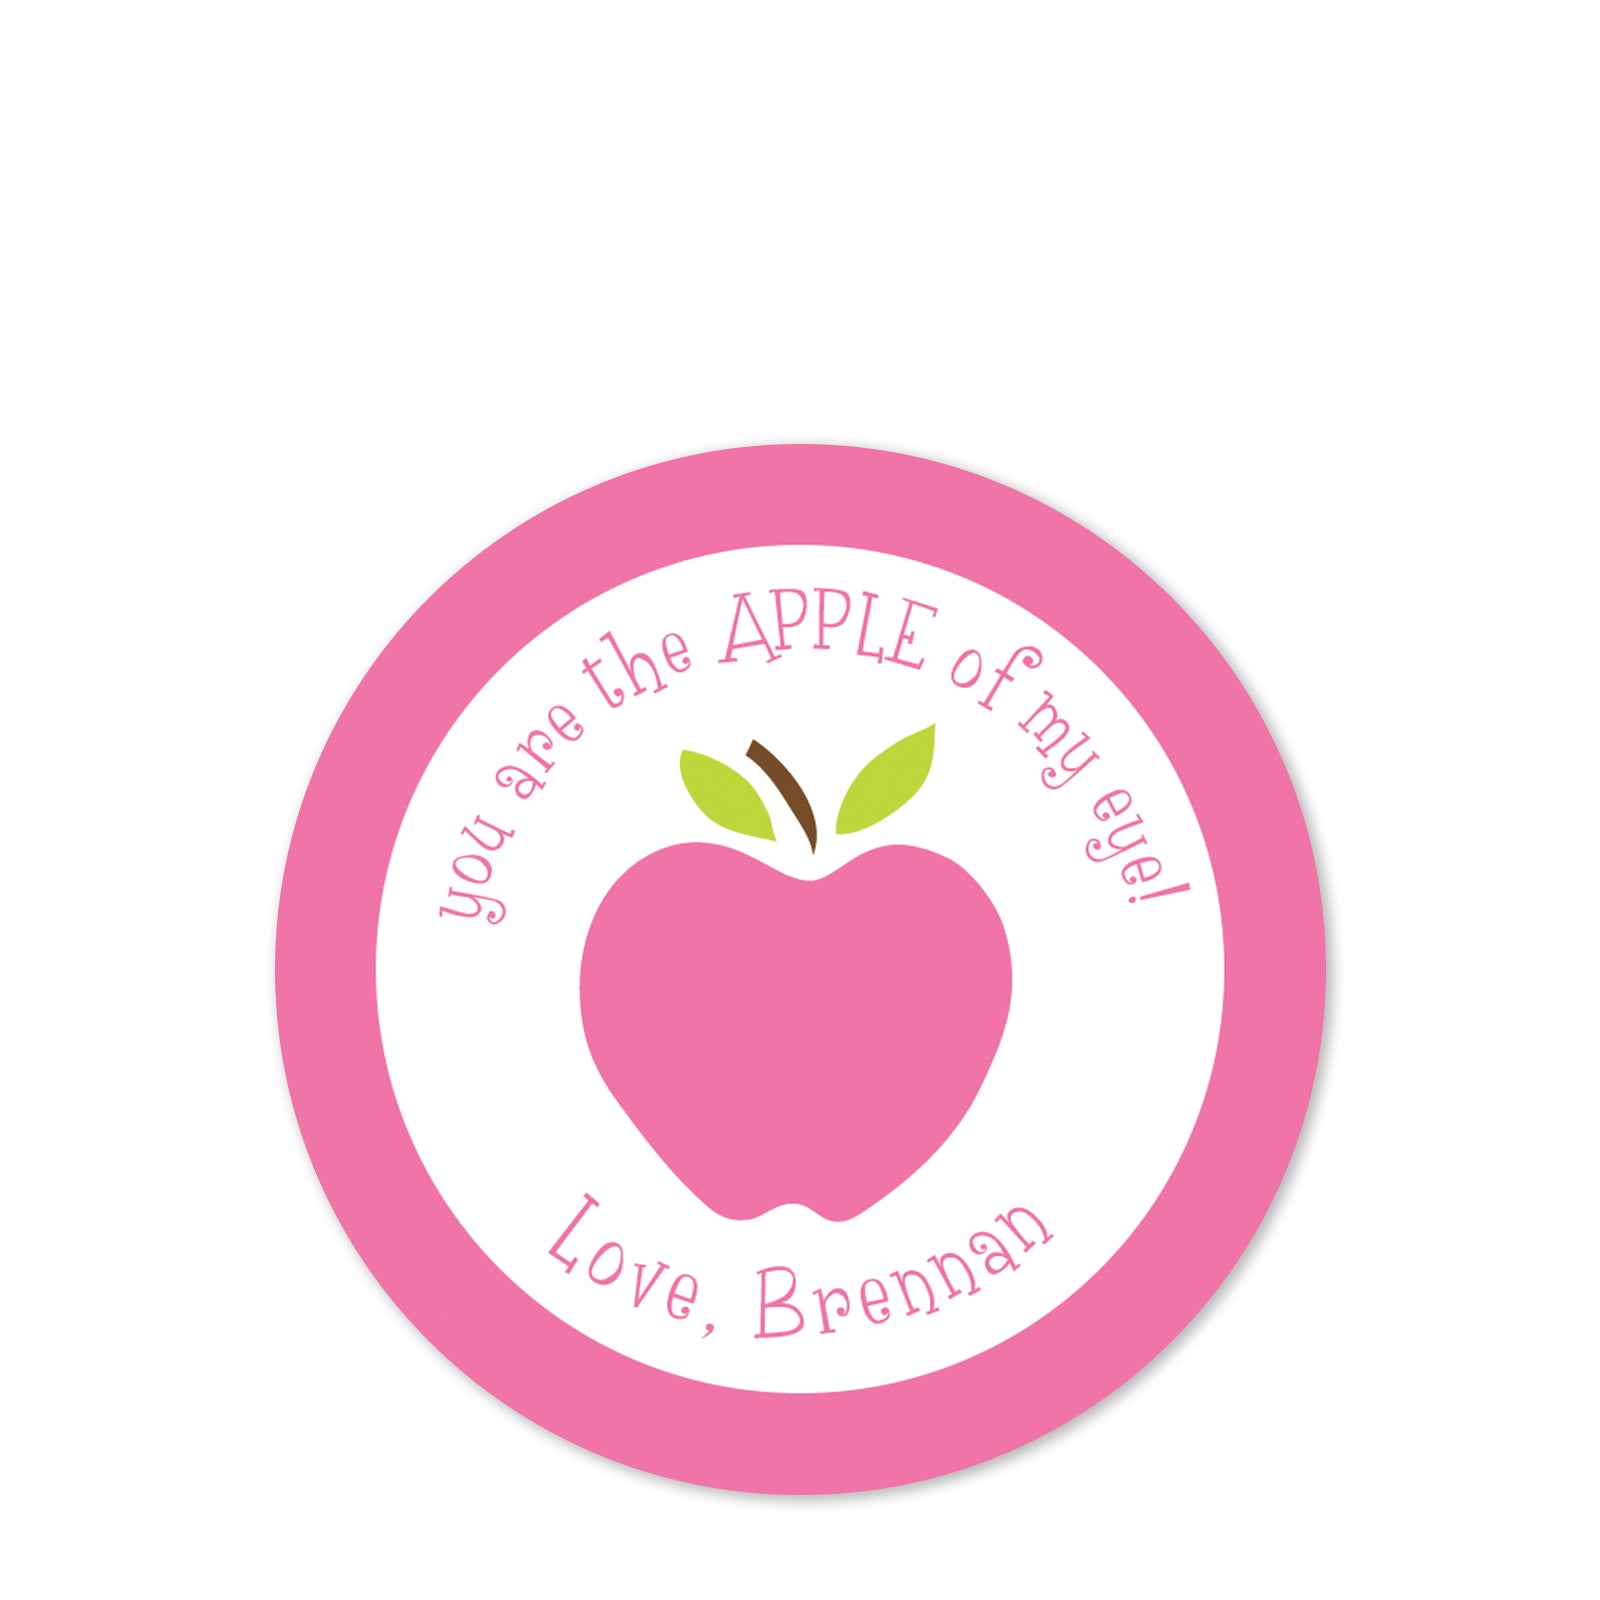 You are the apple of my eye | Class party stickers | PIPSY.COM